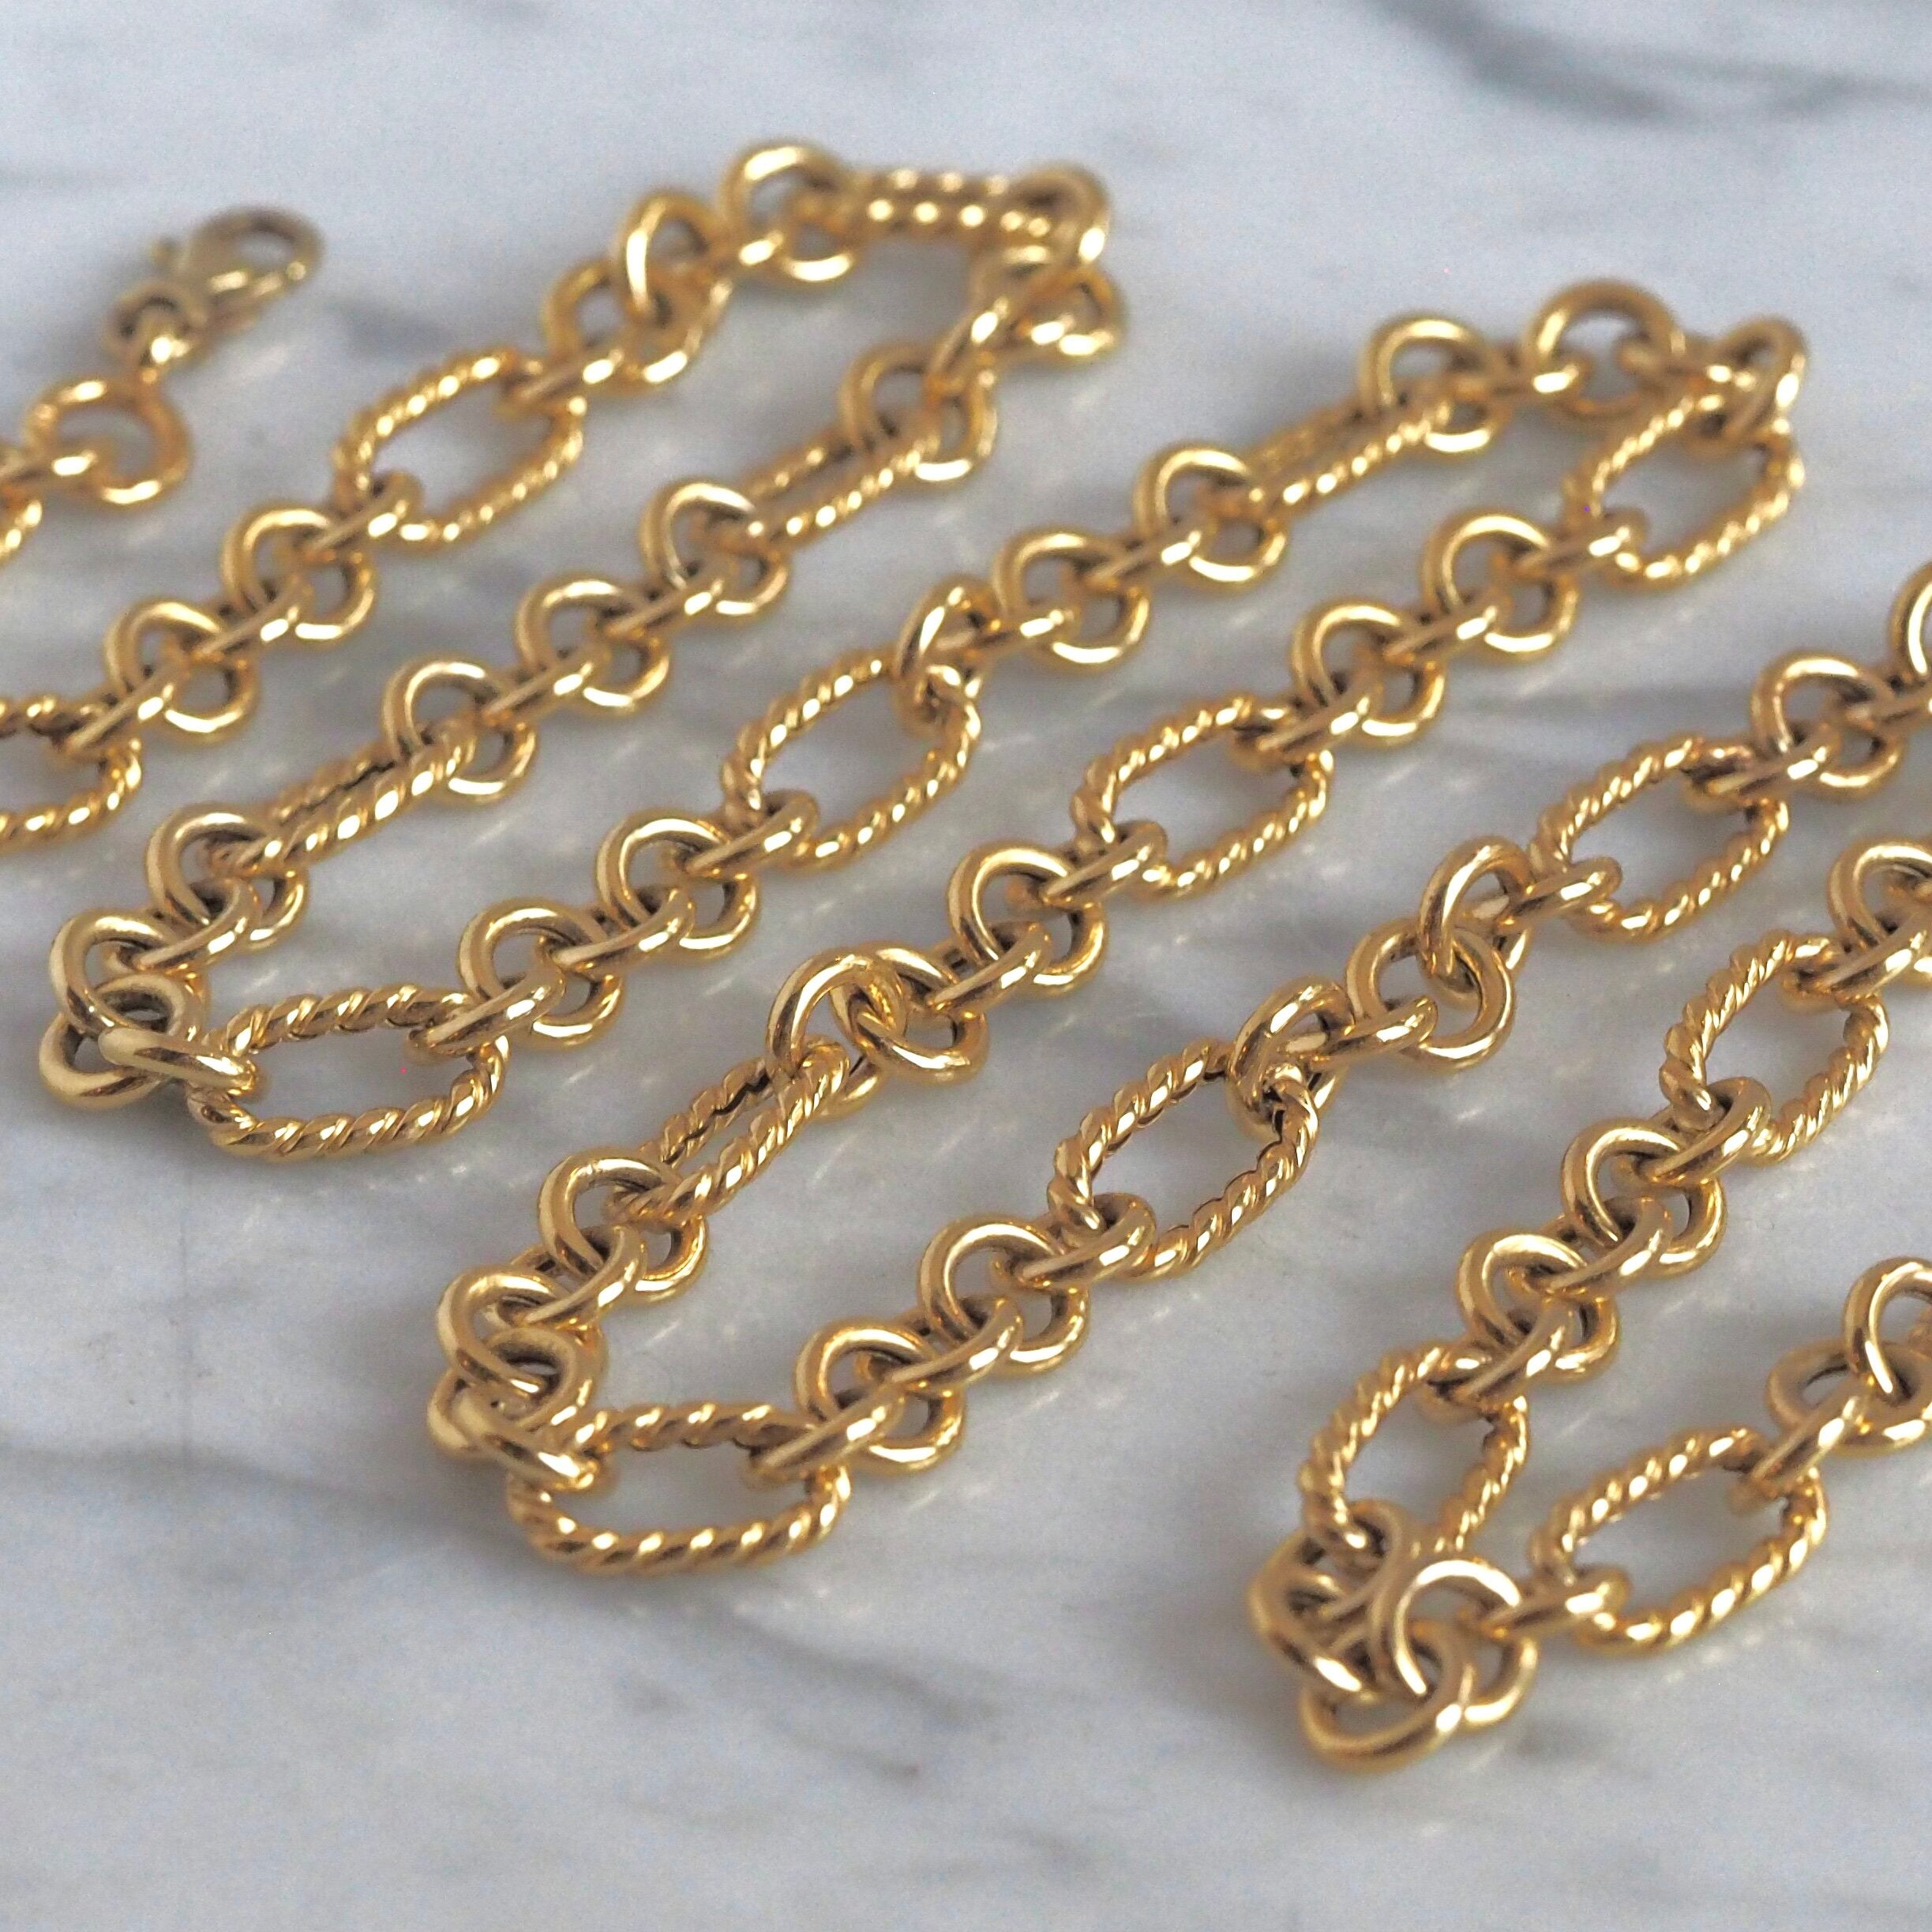 Vintage Italian 14k Gold Textured Oval and Round Rolo Link Chain Necklace